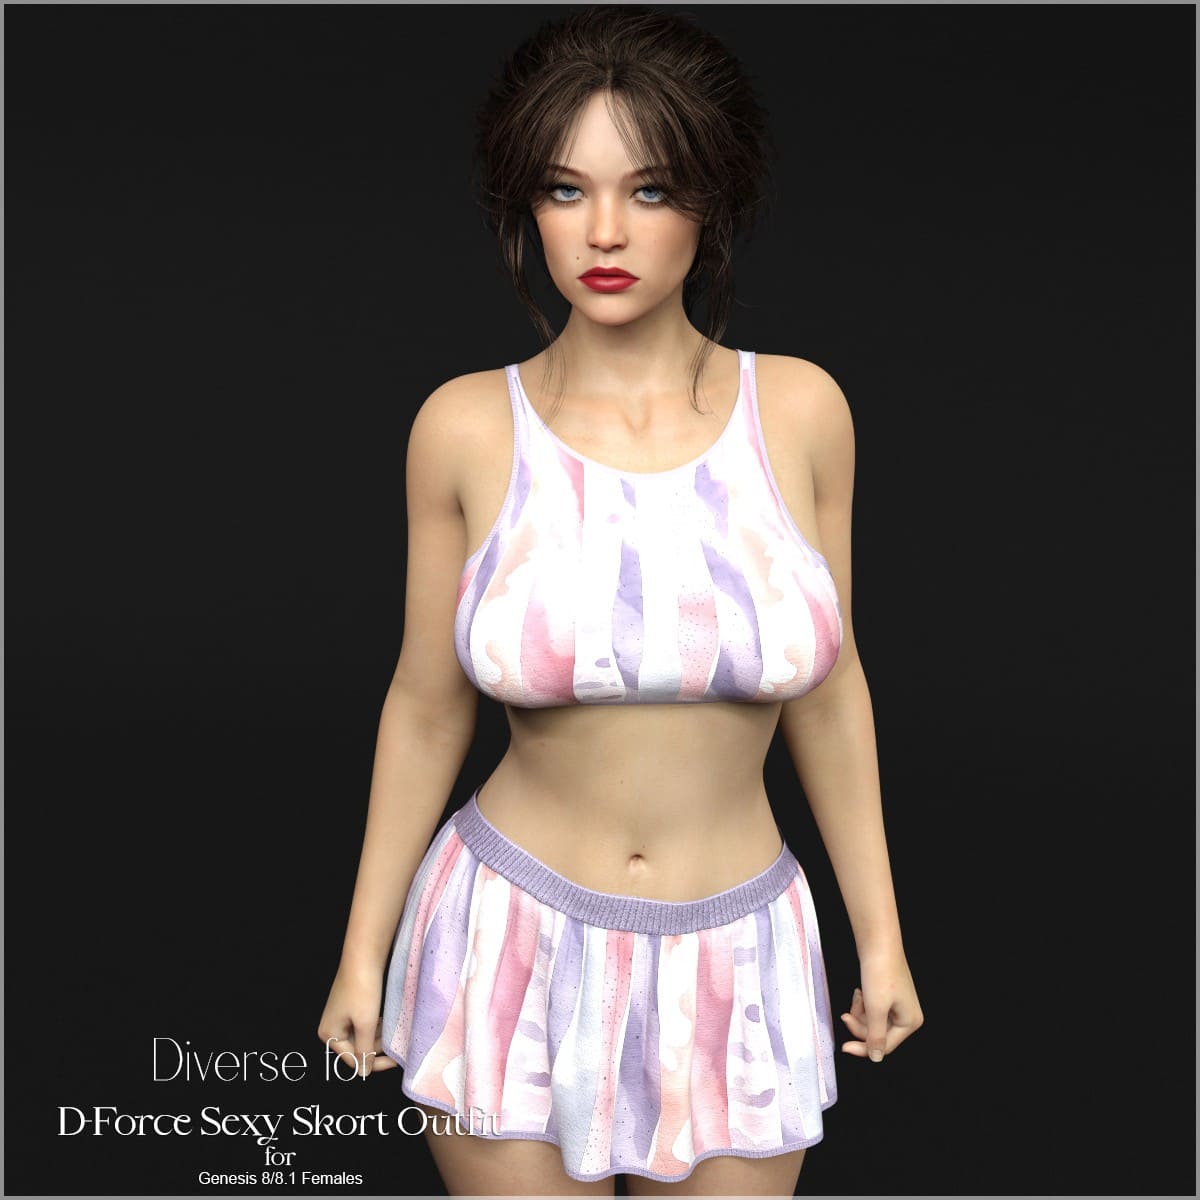 Diverse for D-Force Sexy Skort Outfit for G8F and G8.1F_DAZ3DDL